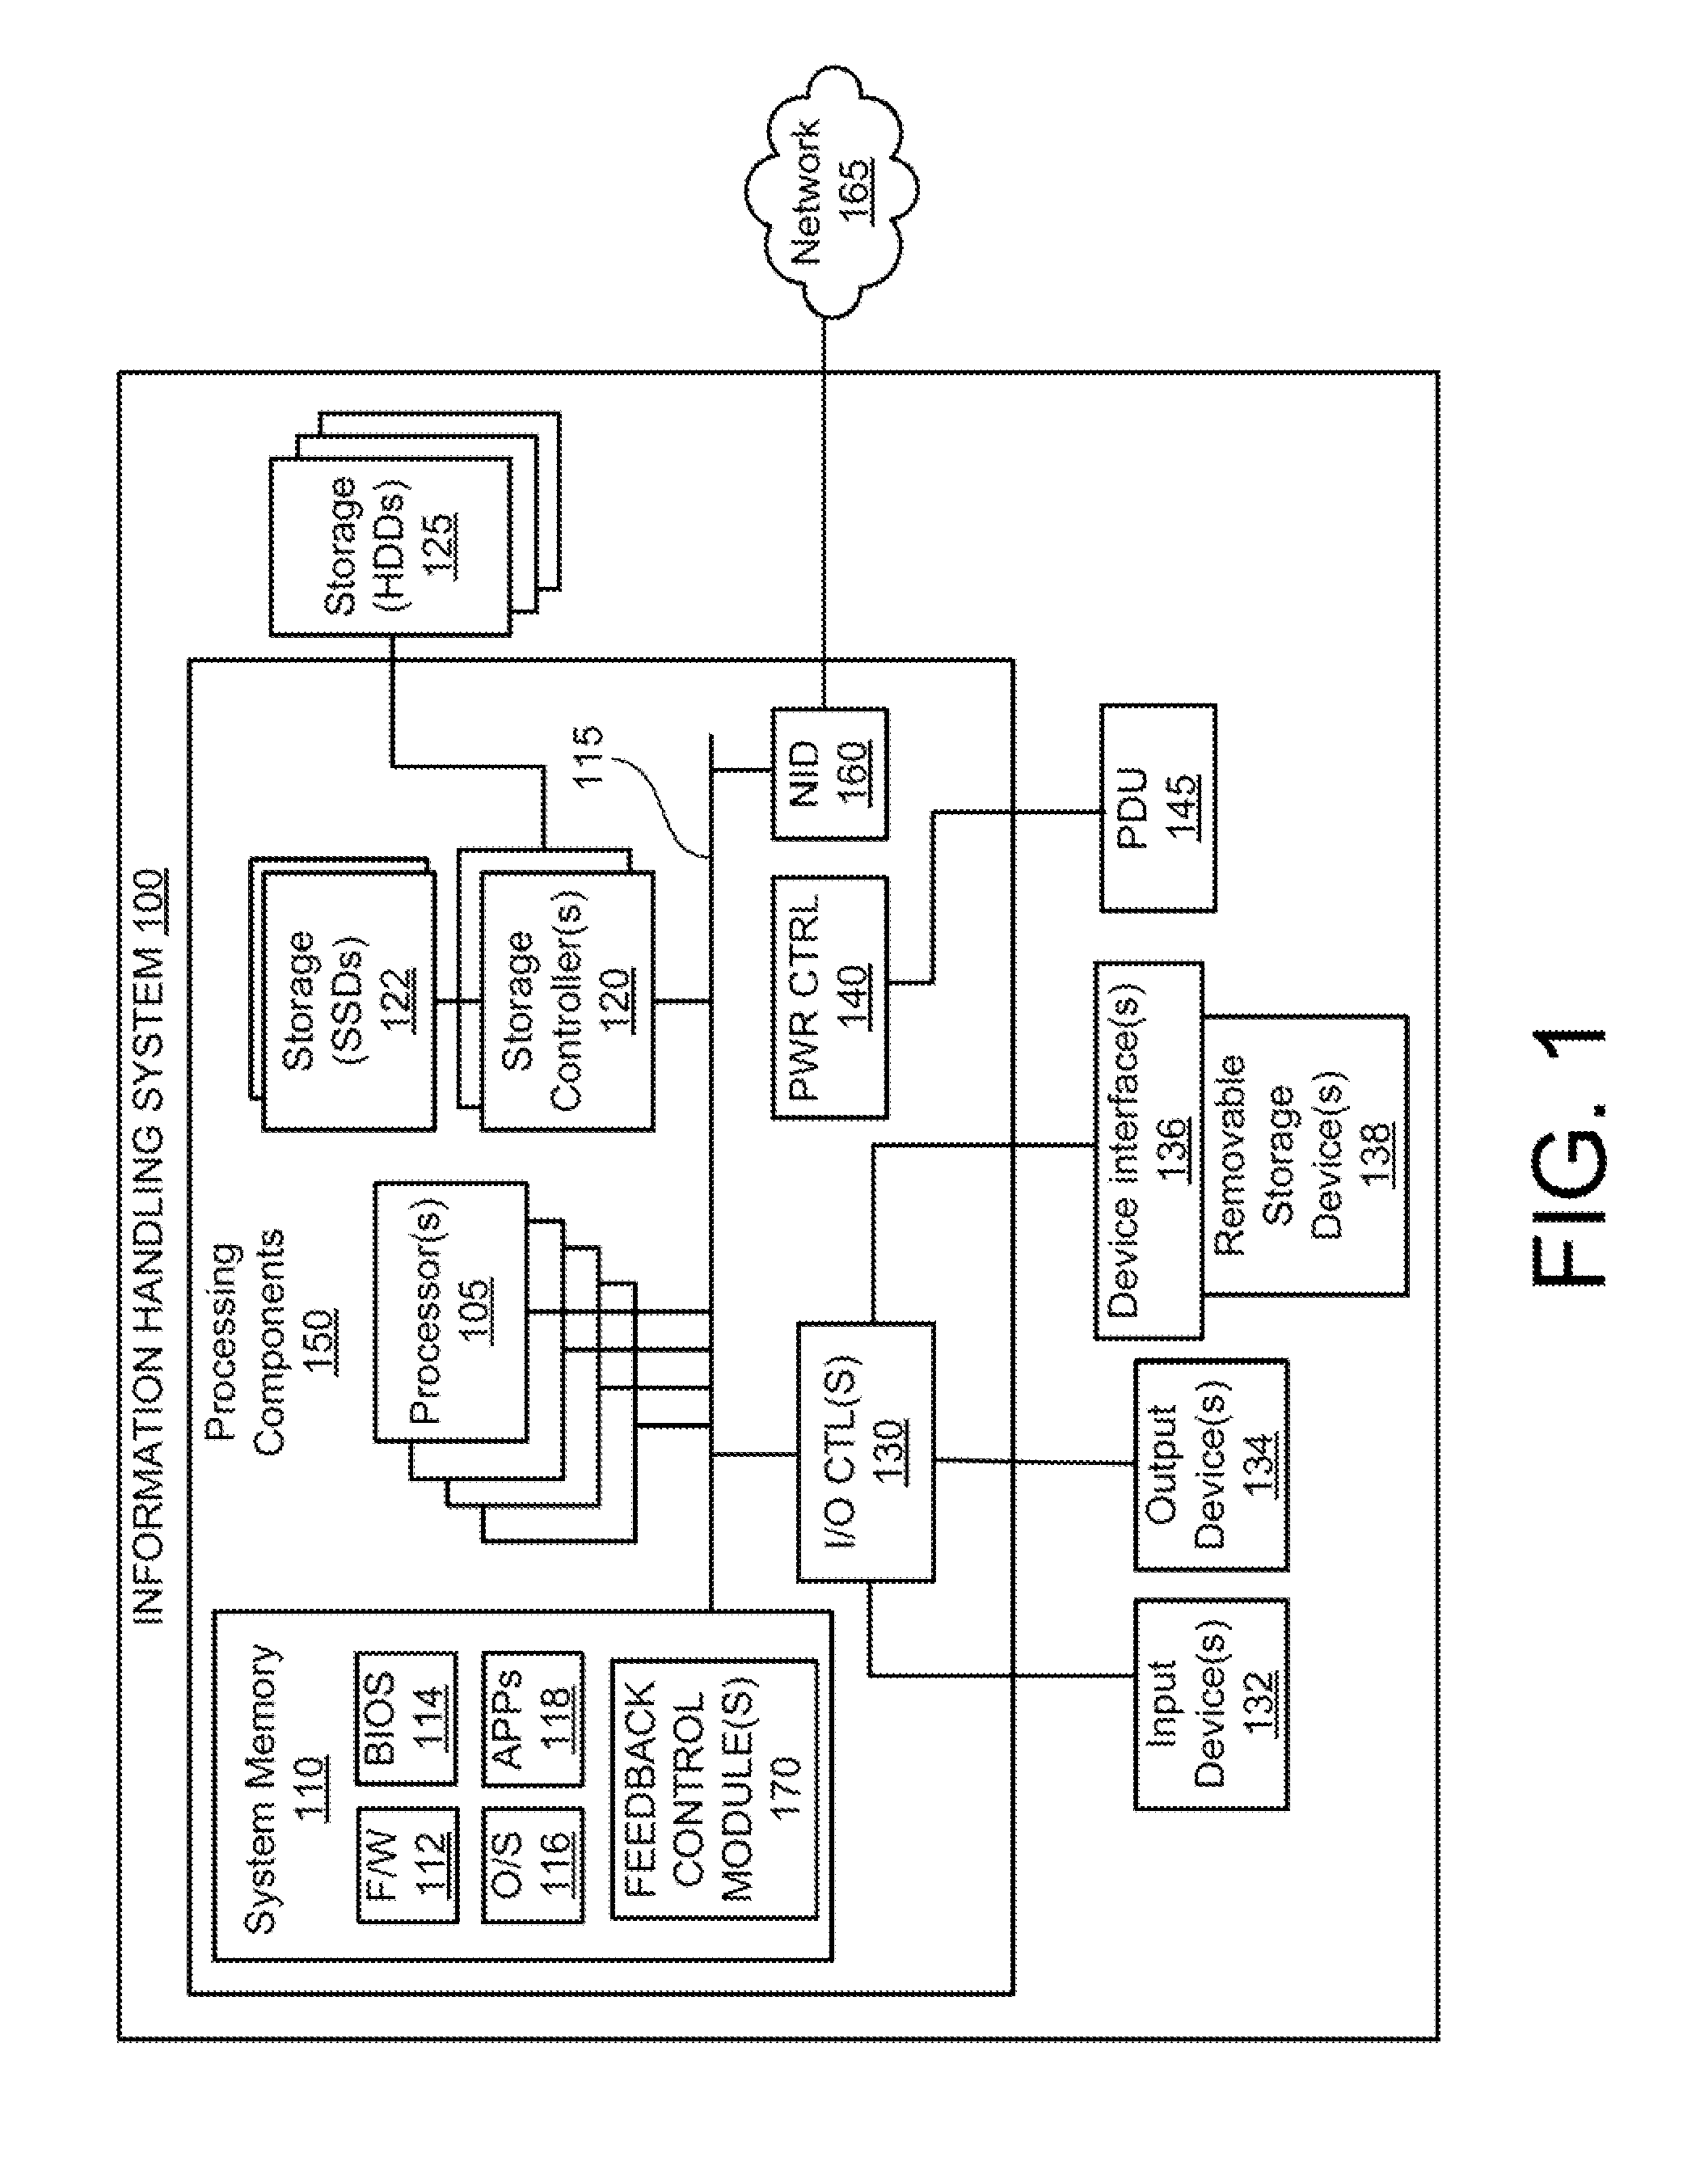 Partitioned, Rotating Condenser Units to Enable Servicing of Submerged IT Equipment Positioned Beneath a Vapor Condenser Without Interrupting a Vaporization-Condensation Cycling of the Remaining Immersion Cooling System